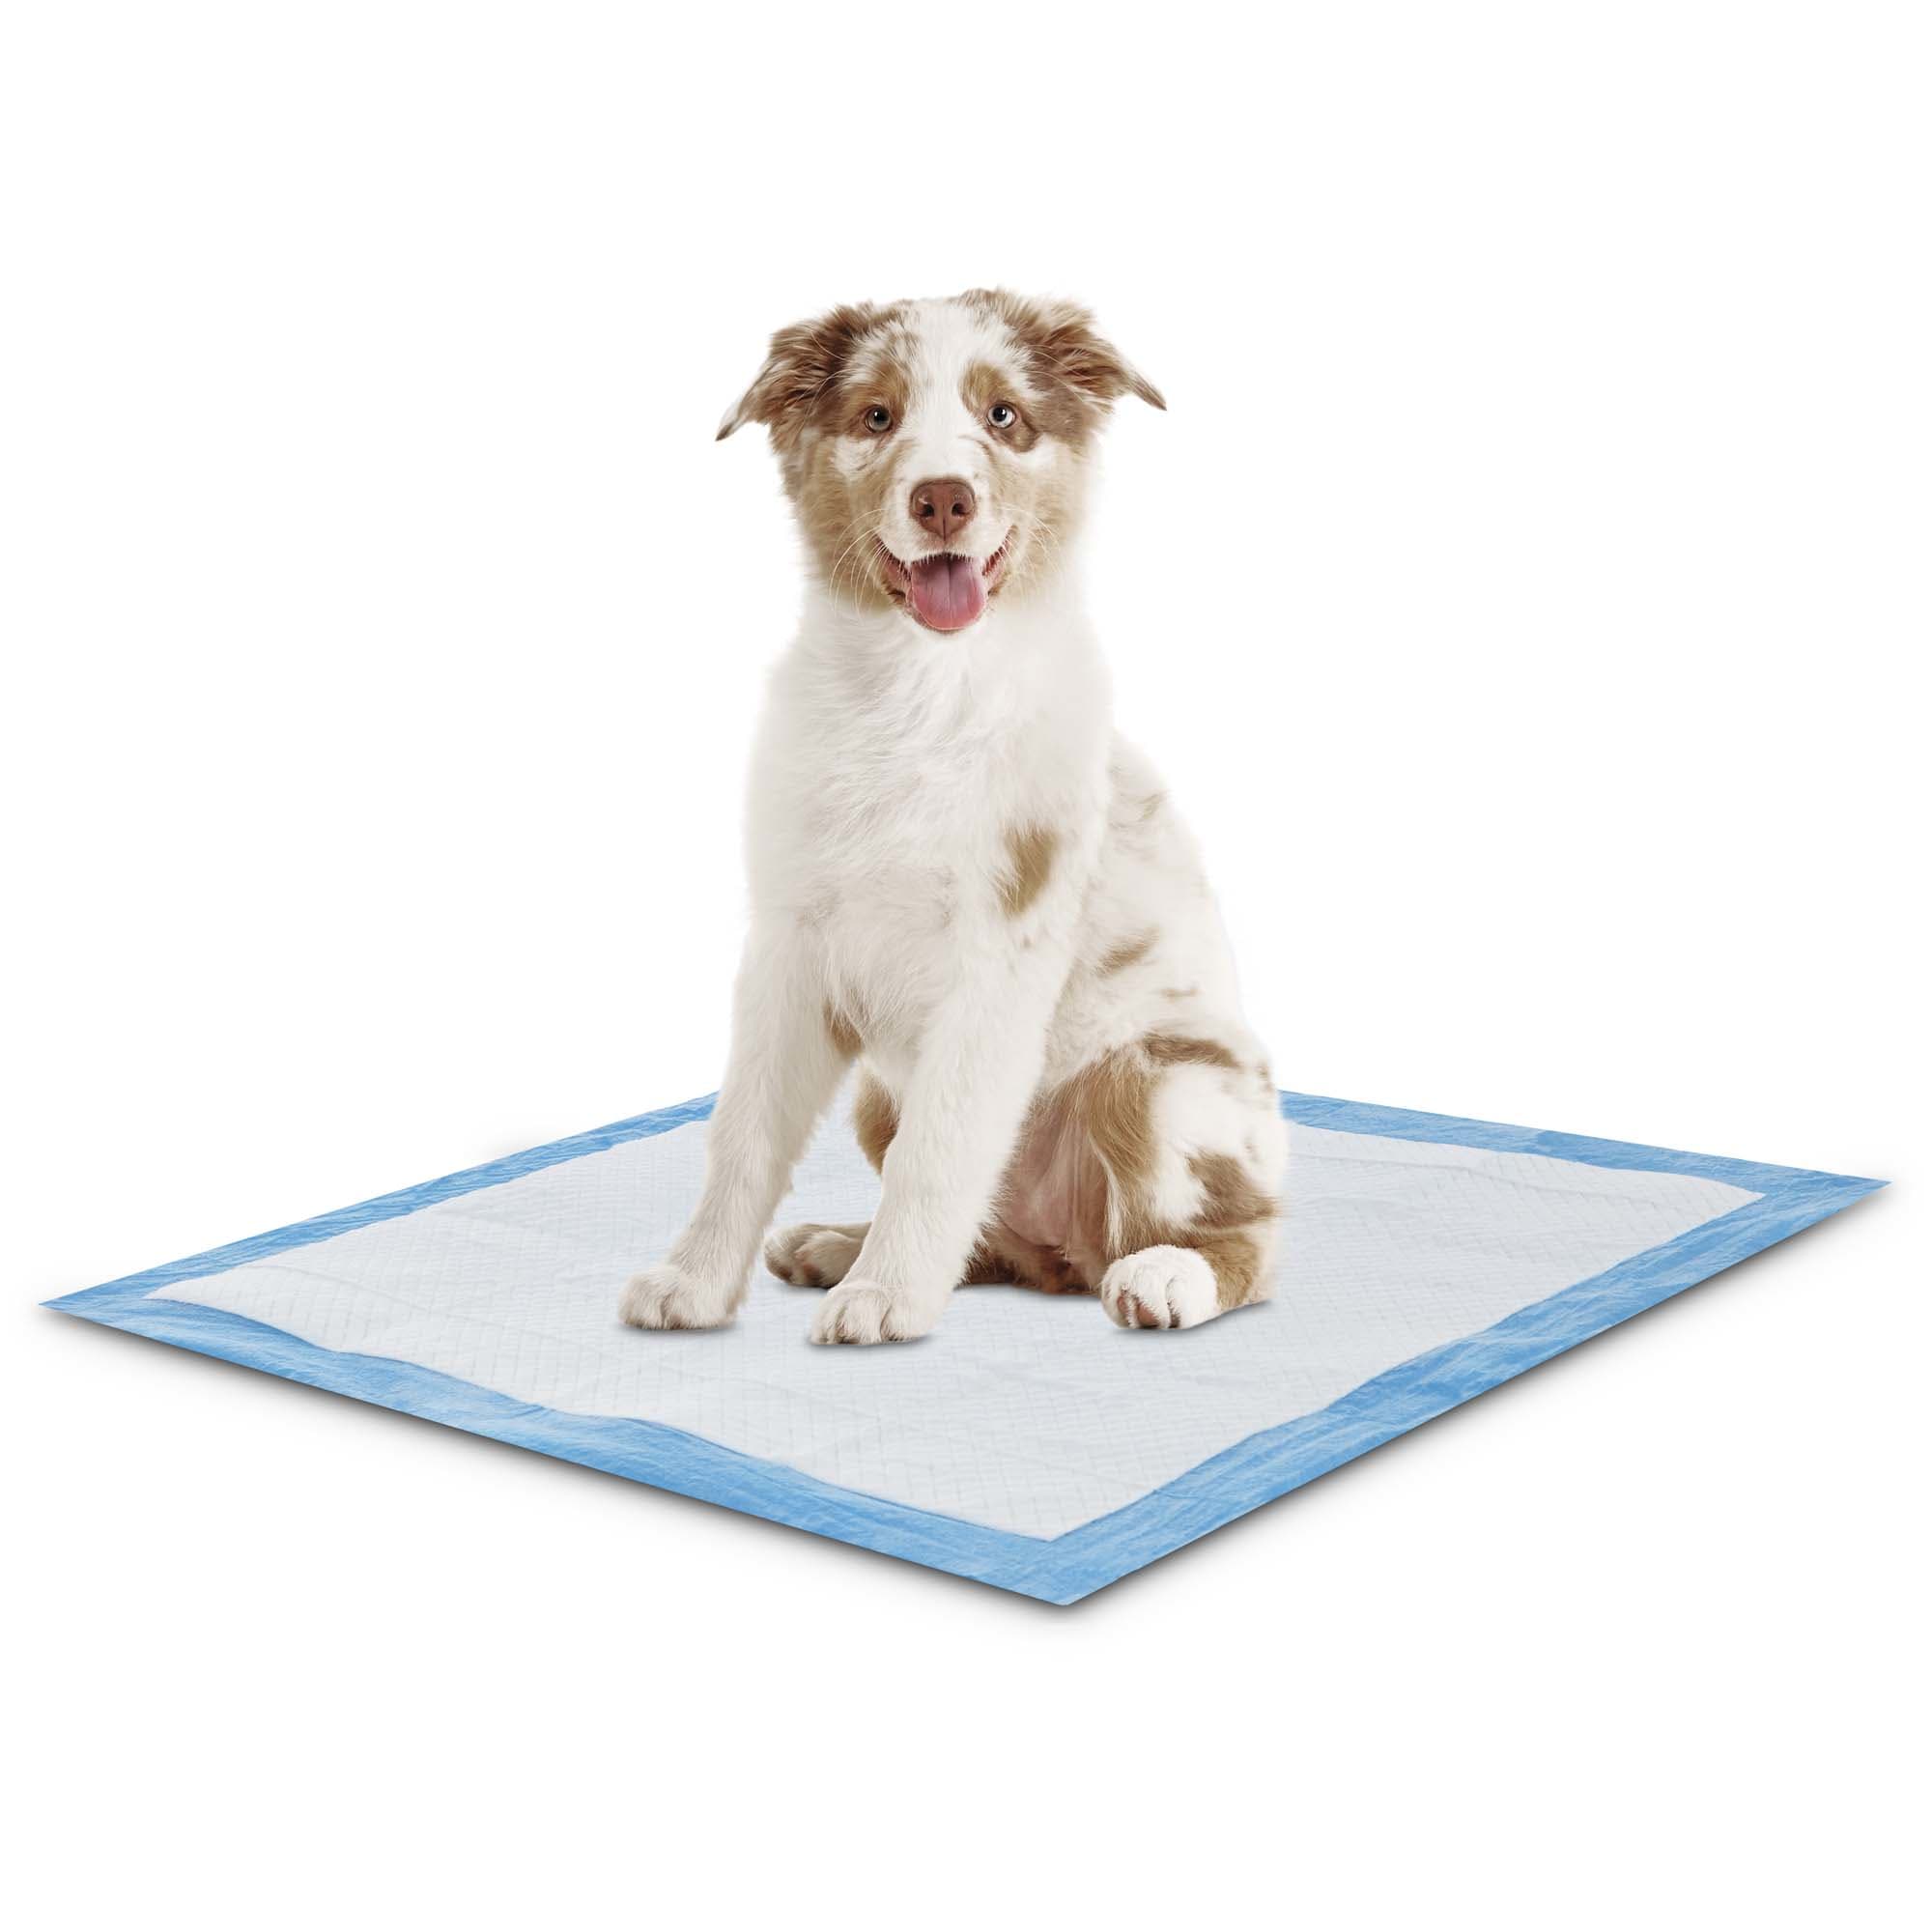 Animaze Absorbent Dog Potty Pads Count Of 150 Petco